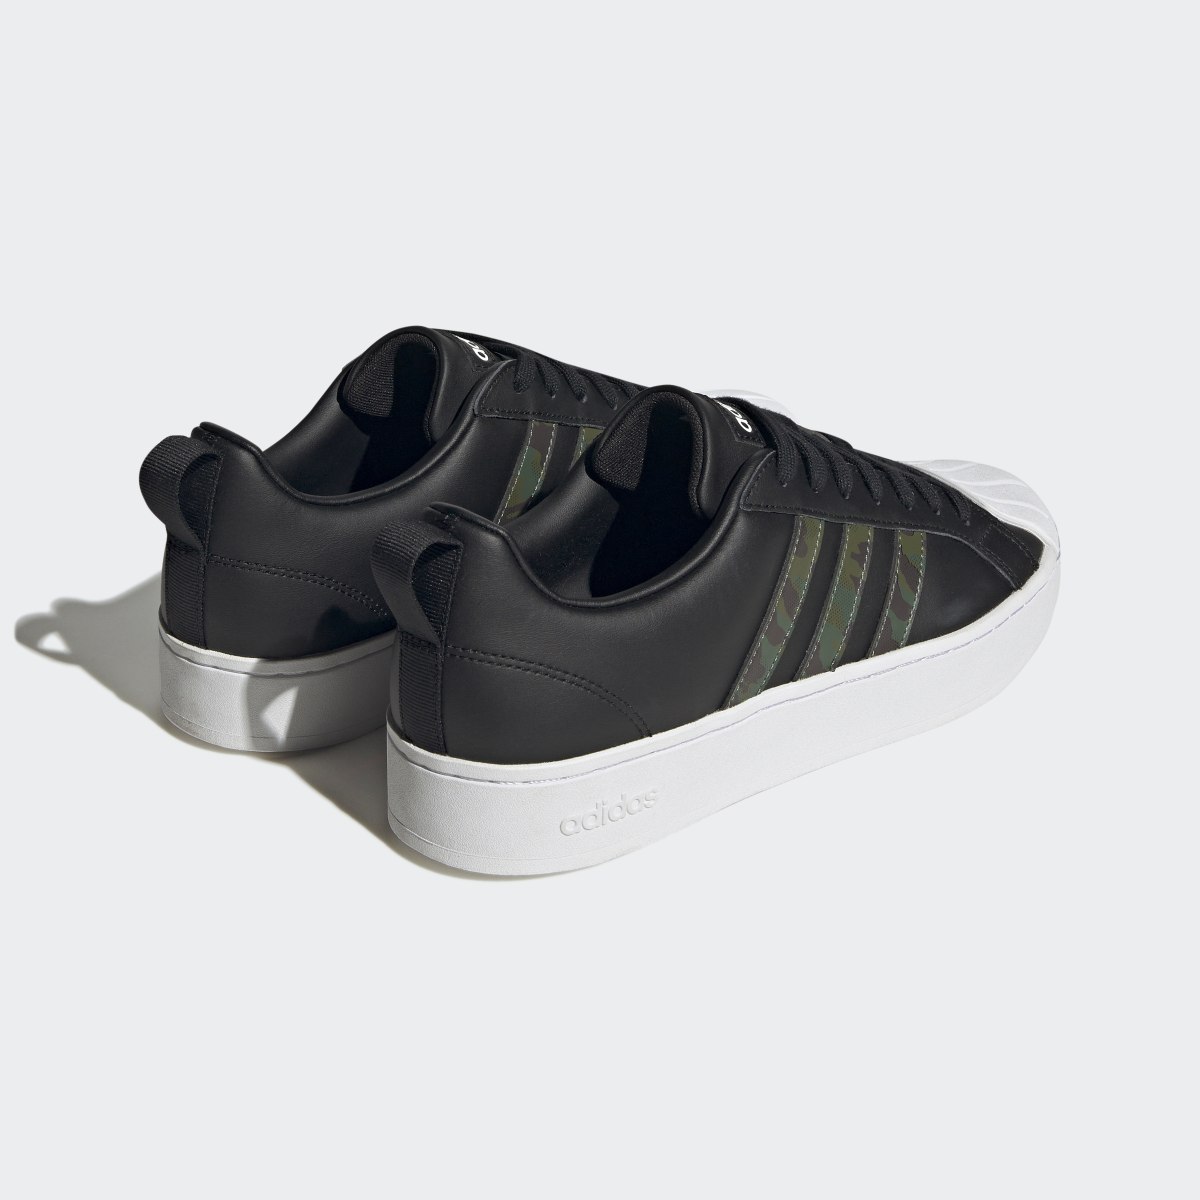 Adidas Streetcheck Cloudfoam Lifestyle Basketball Low Court Camo Graphic Shoes. 6